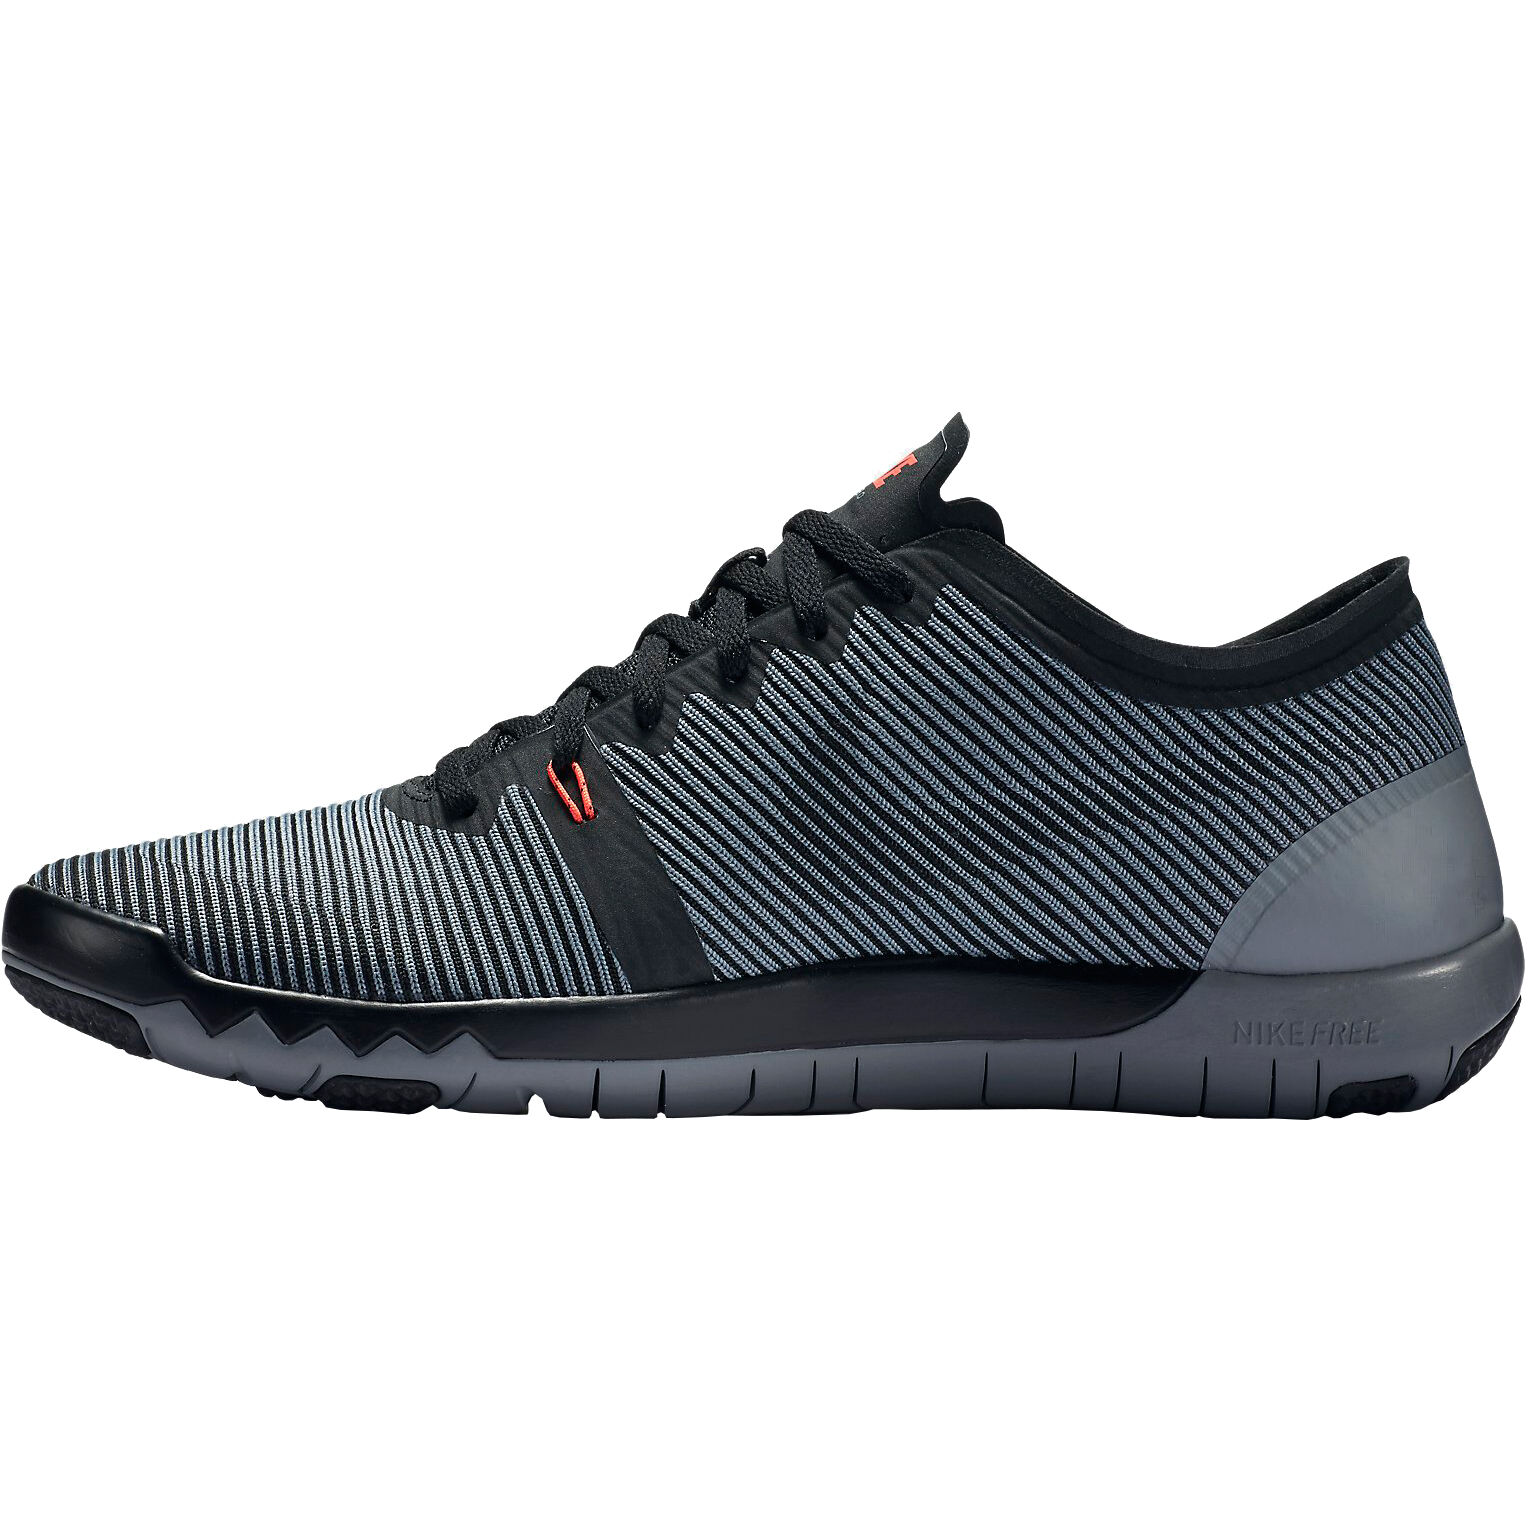 nike free trainer review